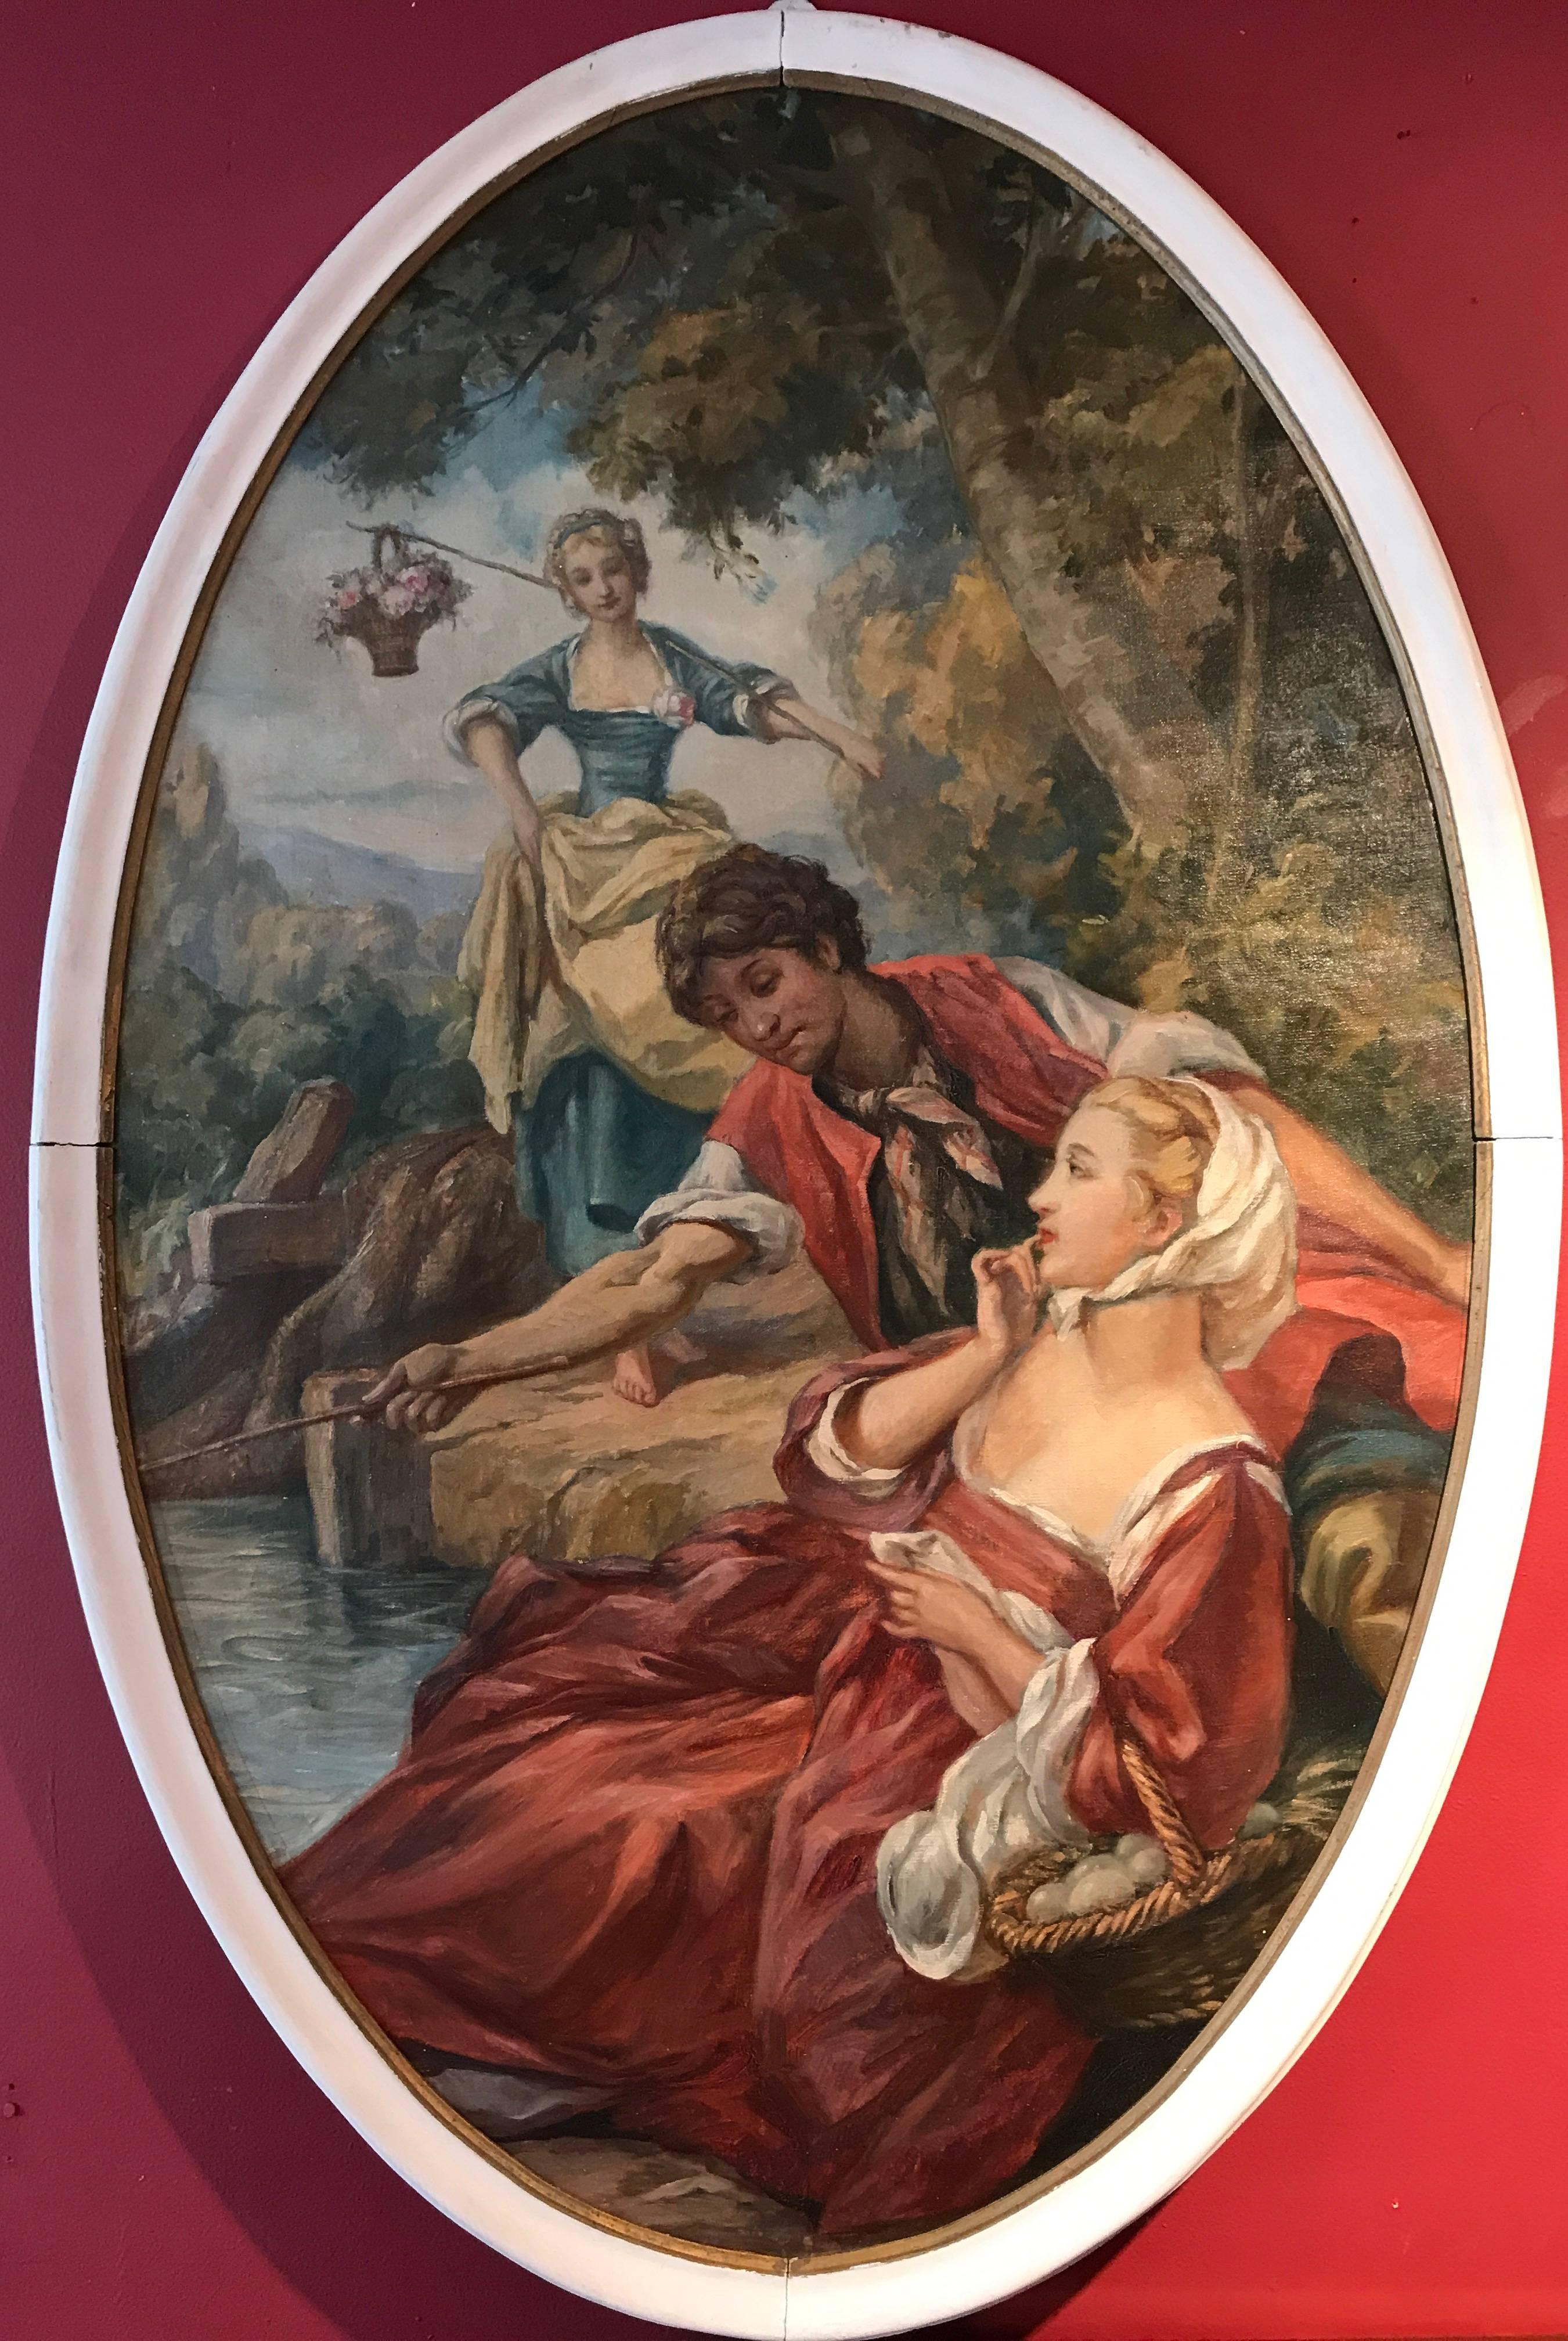 Unknown Figurative Painting - Large Oval French Rococo Style Oil Painting Young Courtship